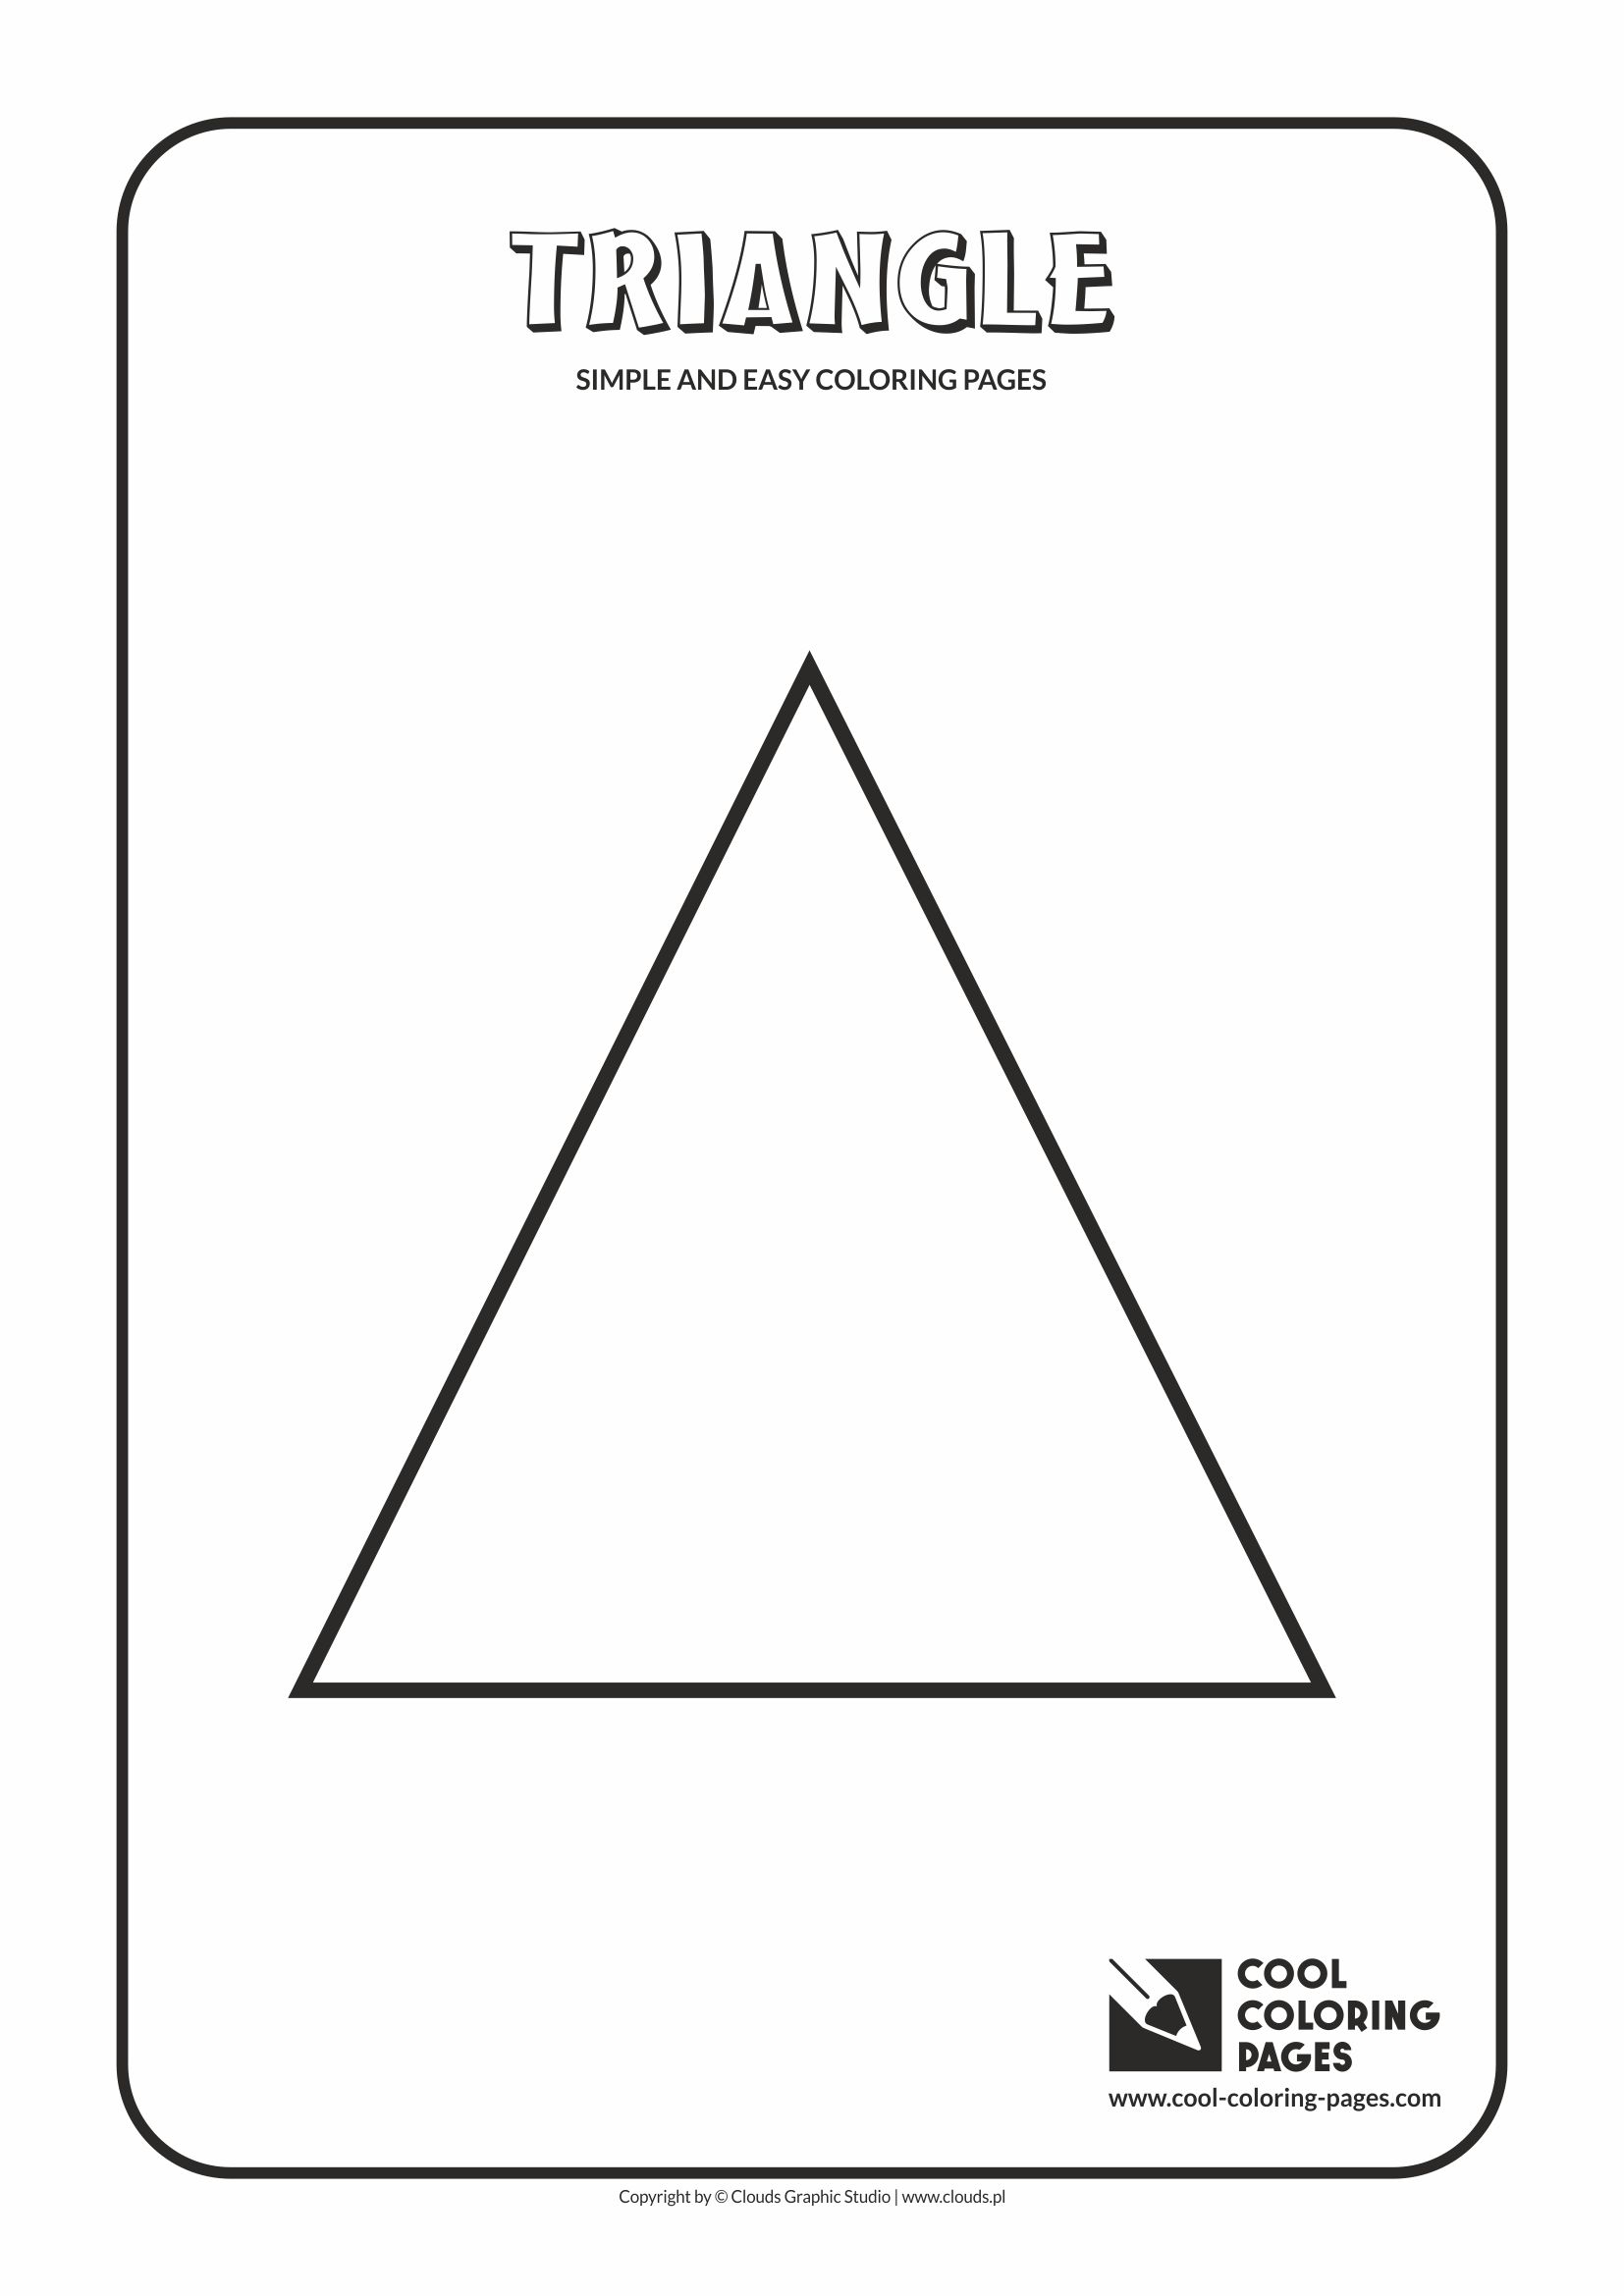 Simple and easy coloring pages for toddlers - Triangle